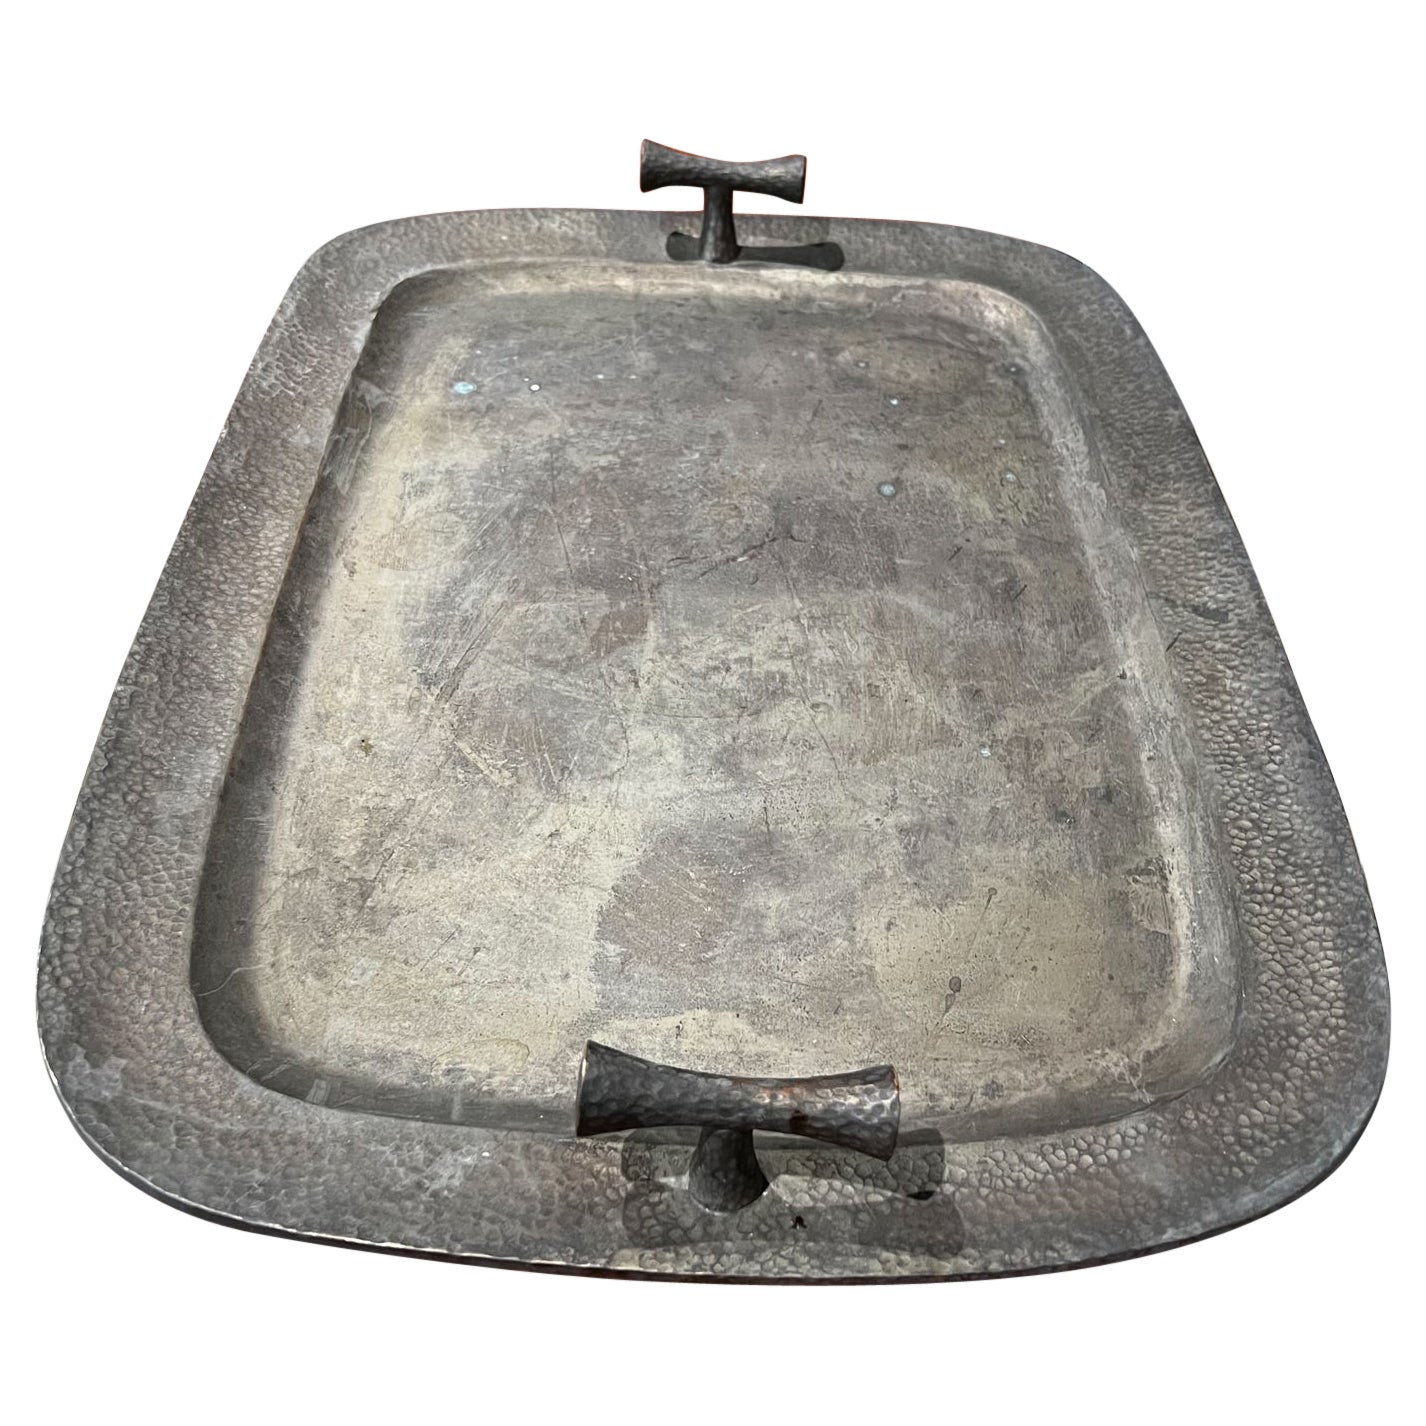 1960s Modern Elegance Hand-Hammered Silver Service Tray from Mexico